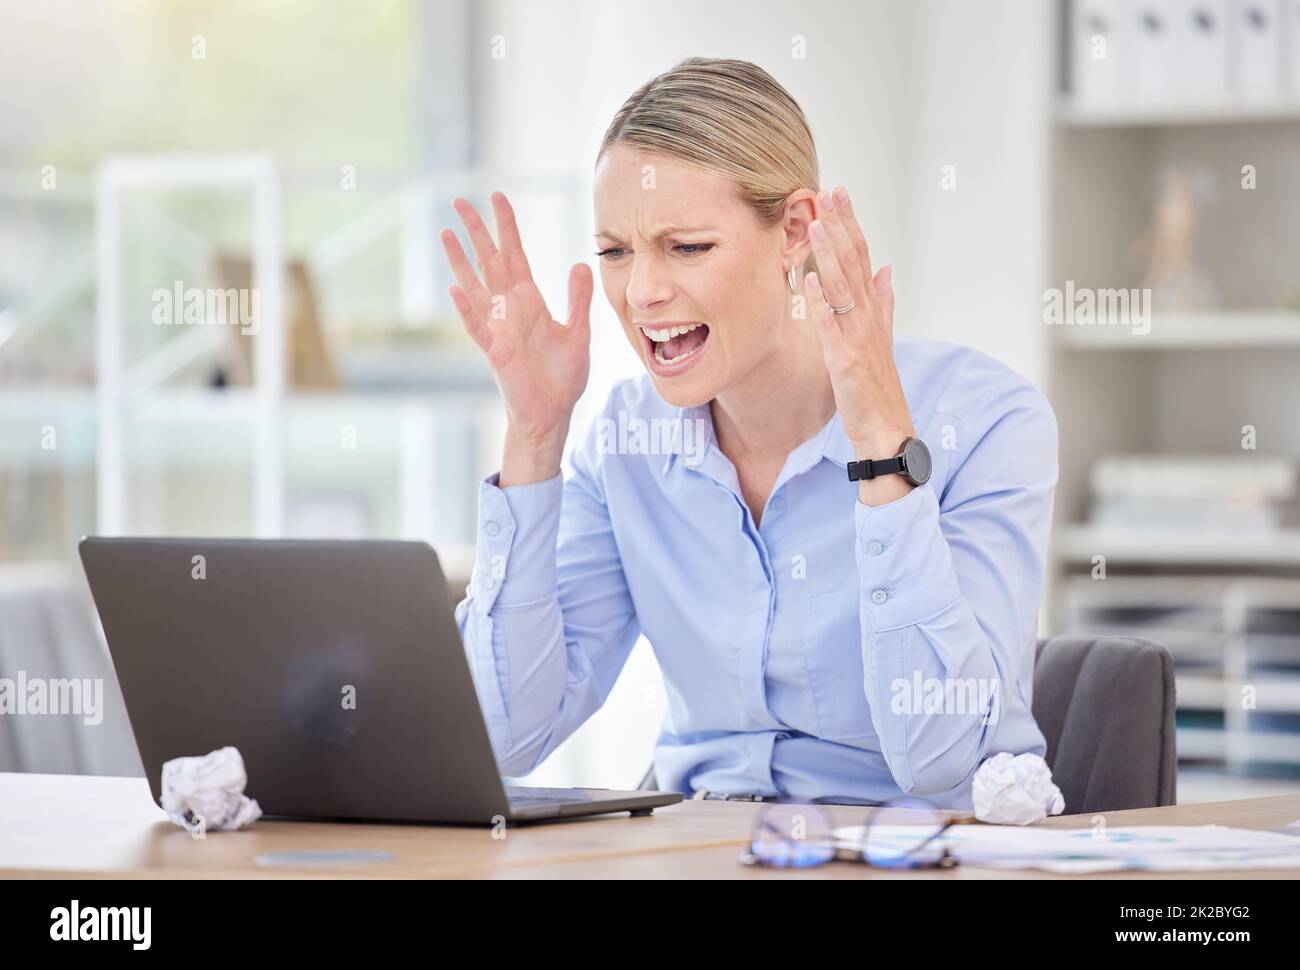 Laptop accident, angry and business woman with anxiety about work email, stress about startup company review and mental health problem in office Stock Photo